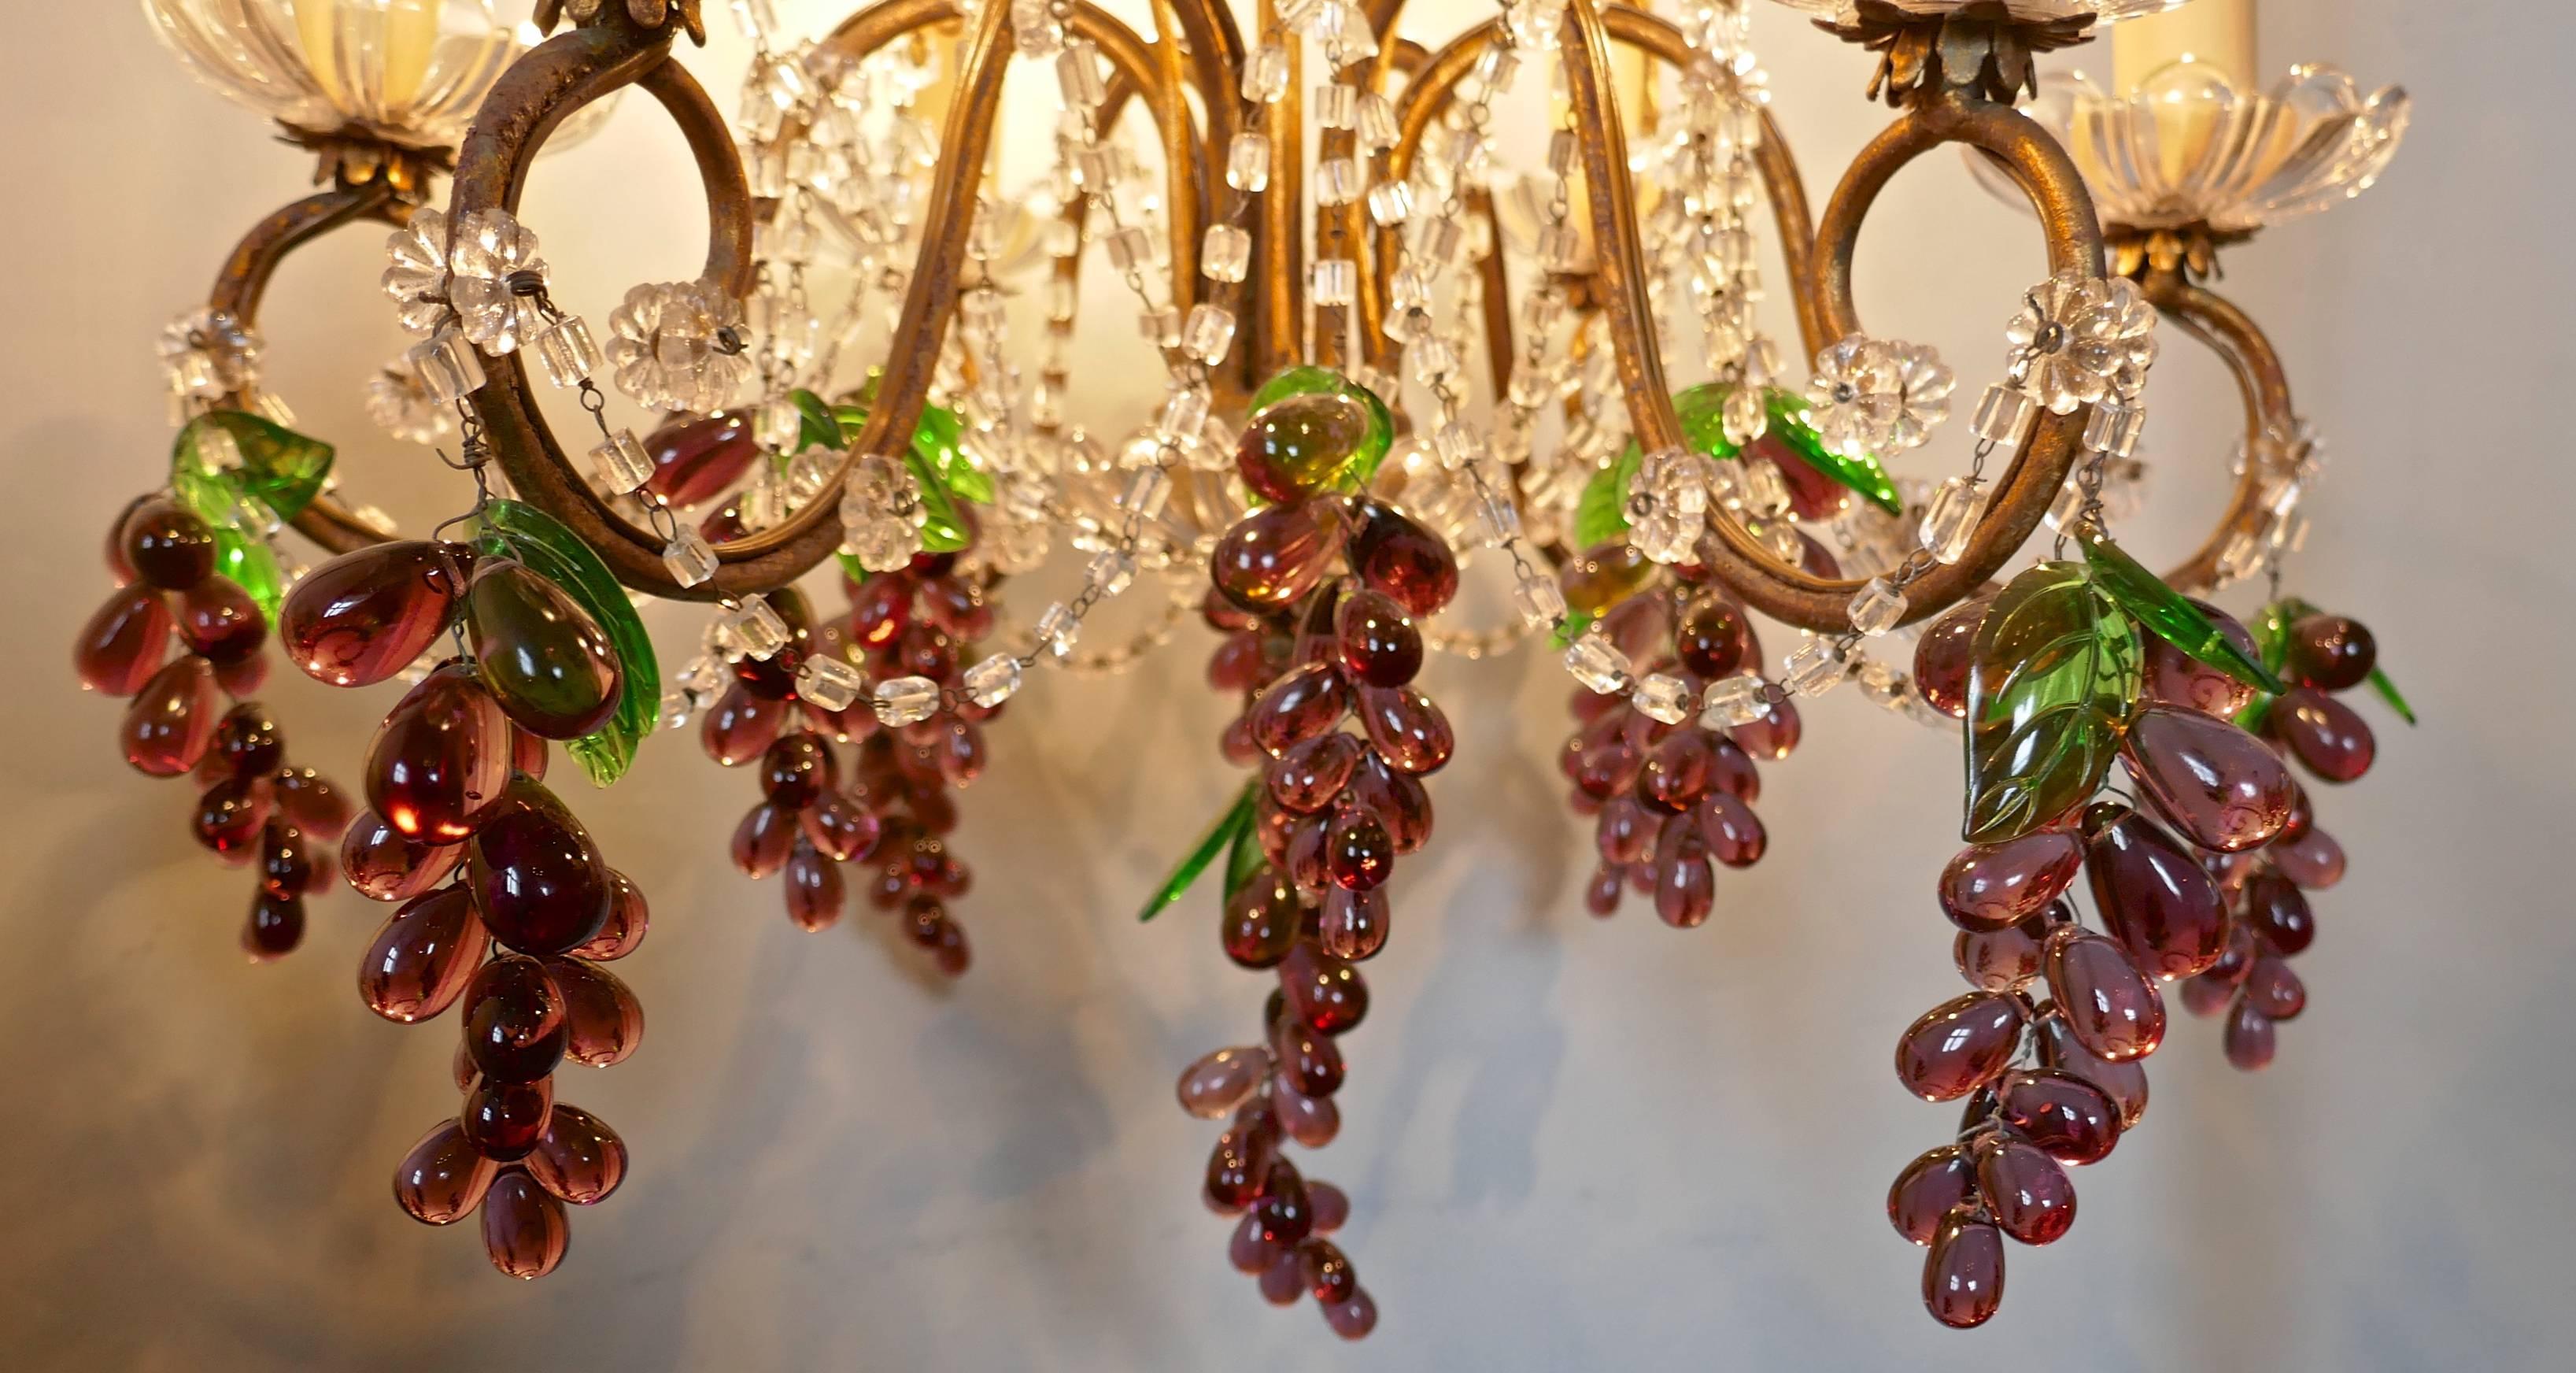 Large six branch chandelier hung with amethyst grapes

This is a stunning piece, the gilded frame is hung with bunches of amethyst grapes, the bunches are small at the top of the light but get larger as we work down to the bottom, each bunch has a